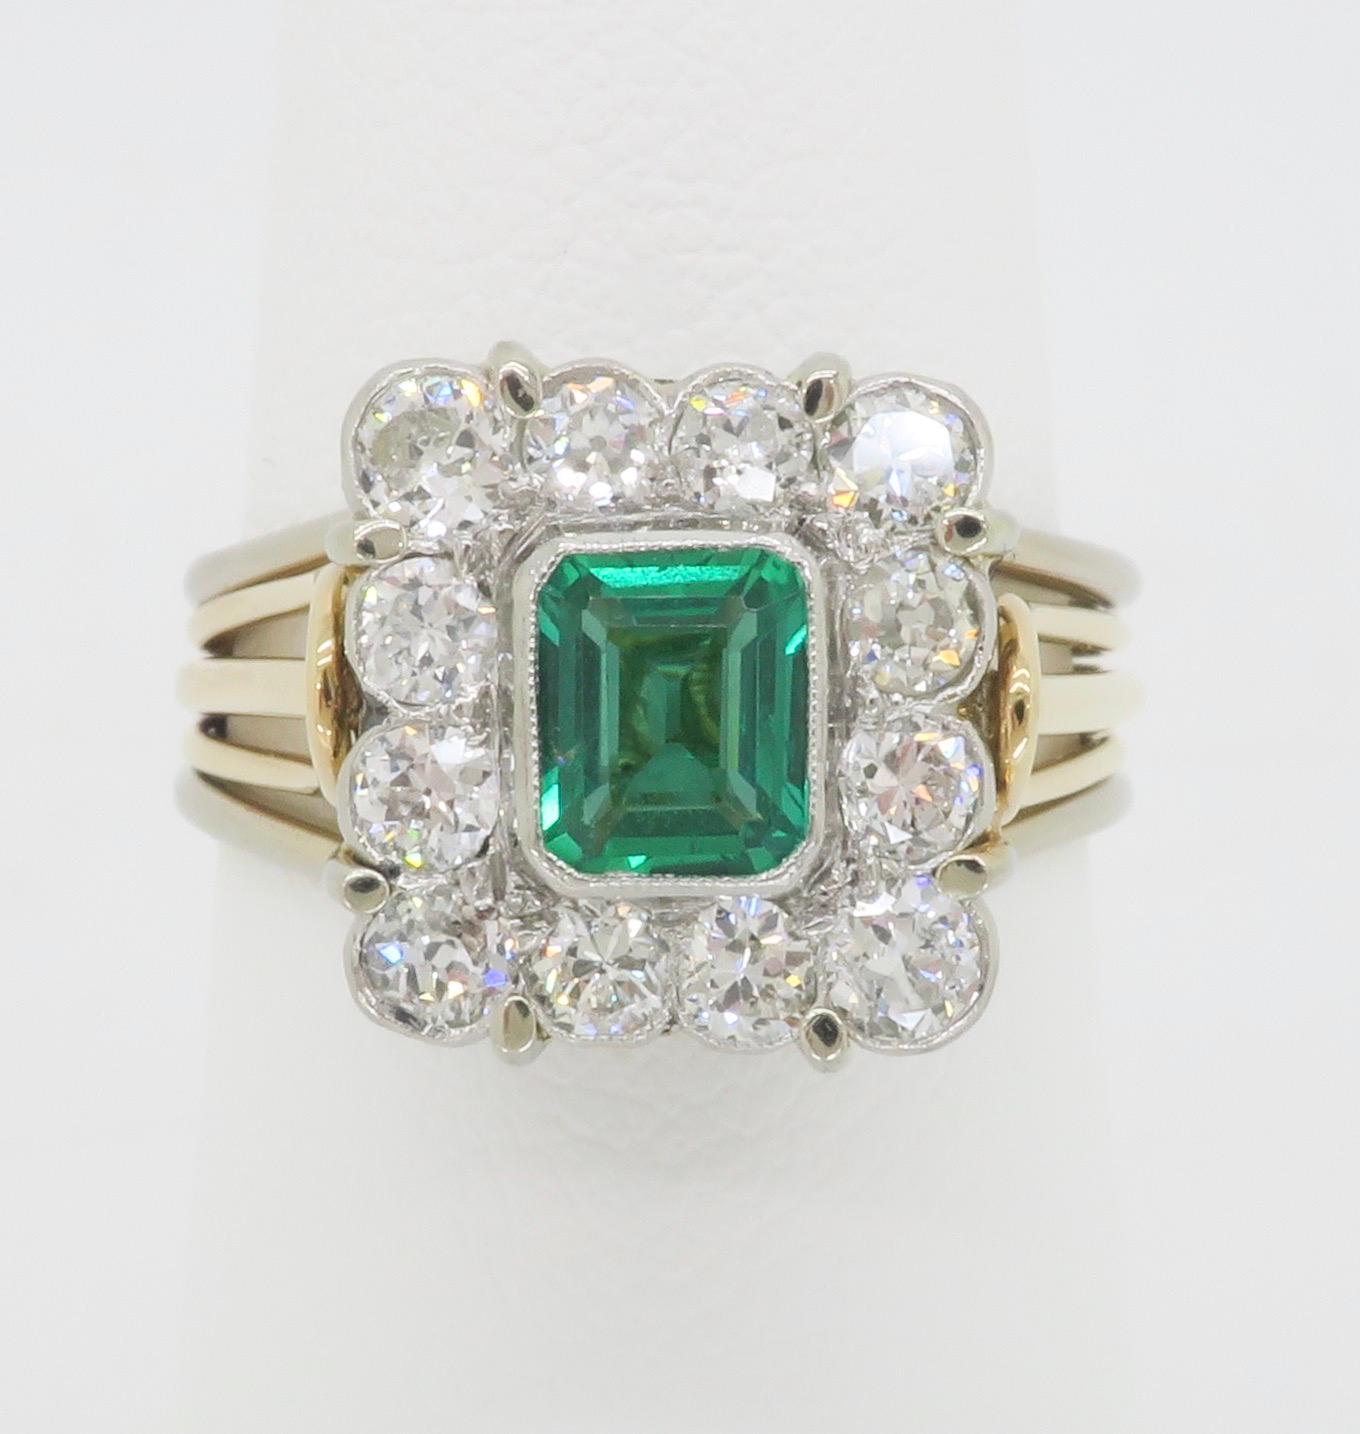 Emerald Cut Vintage Emerald & Diamond Ring Crafted in Platinum & 18k Gold  For Sale